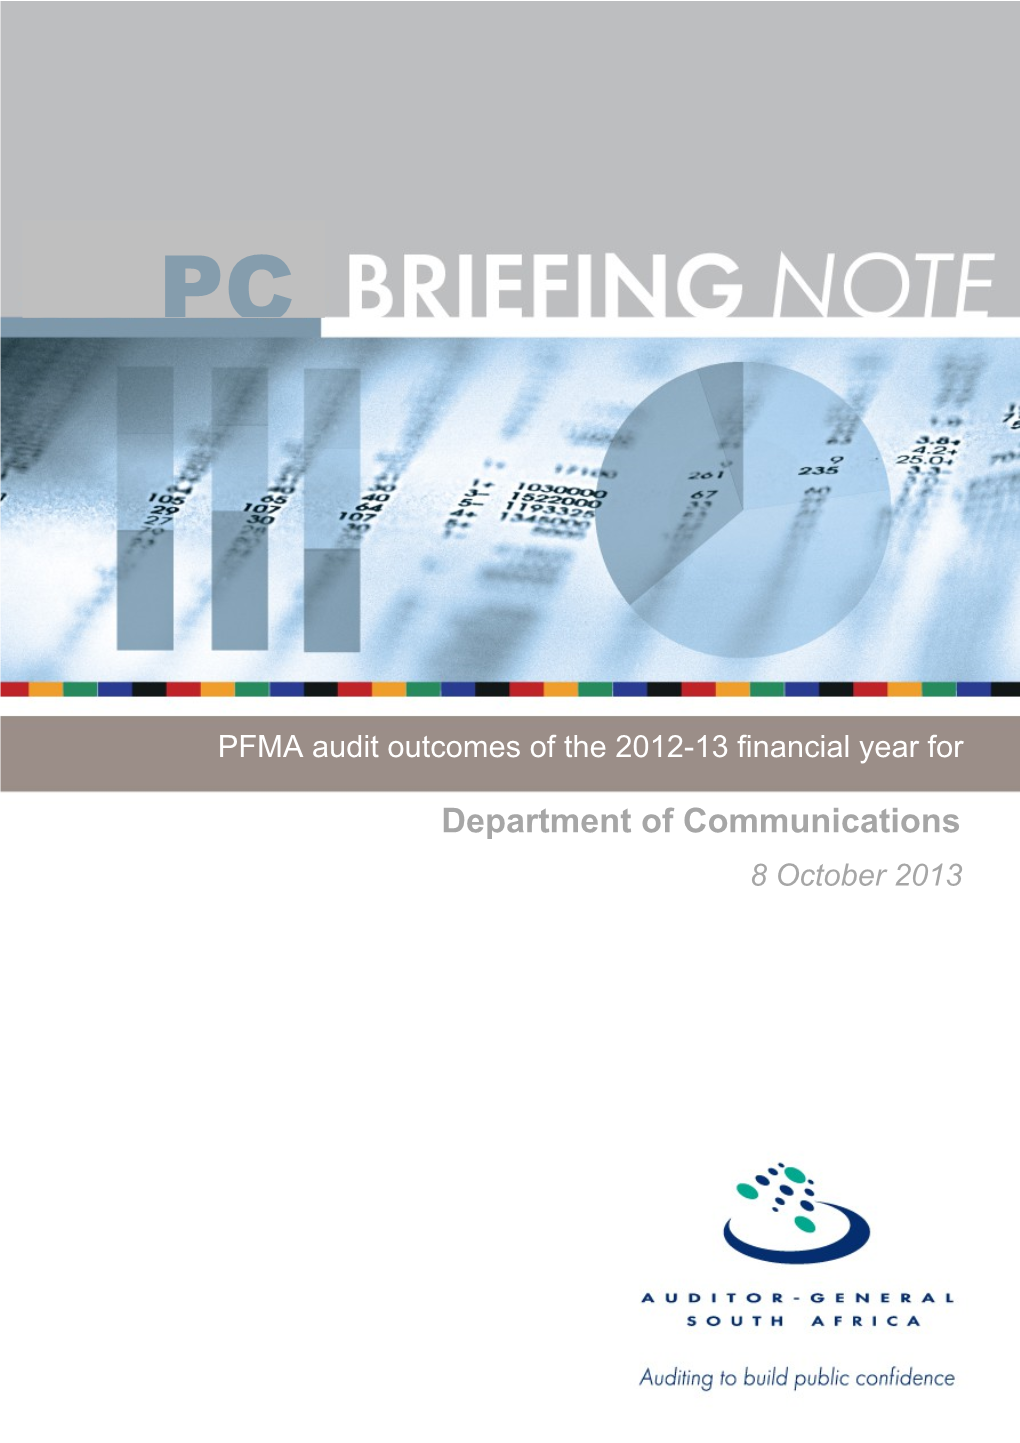 Communications Portfolio Committee Briefing Note (2012-13)